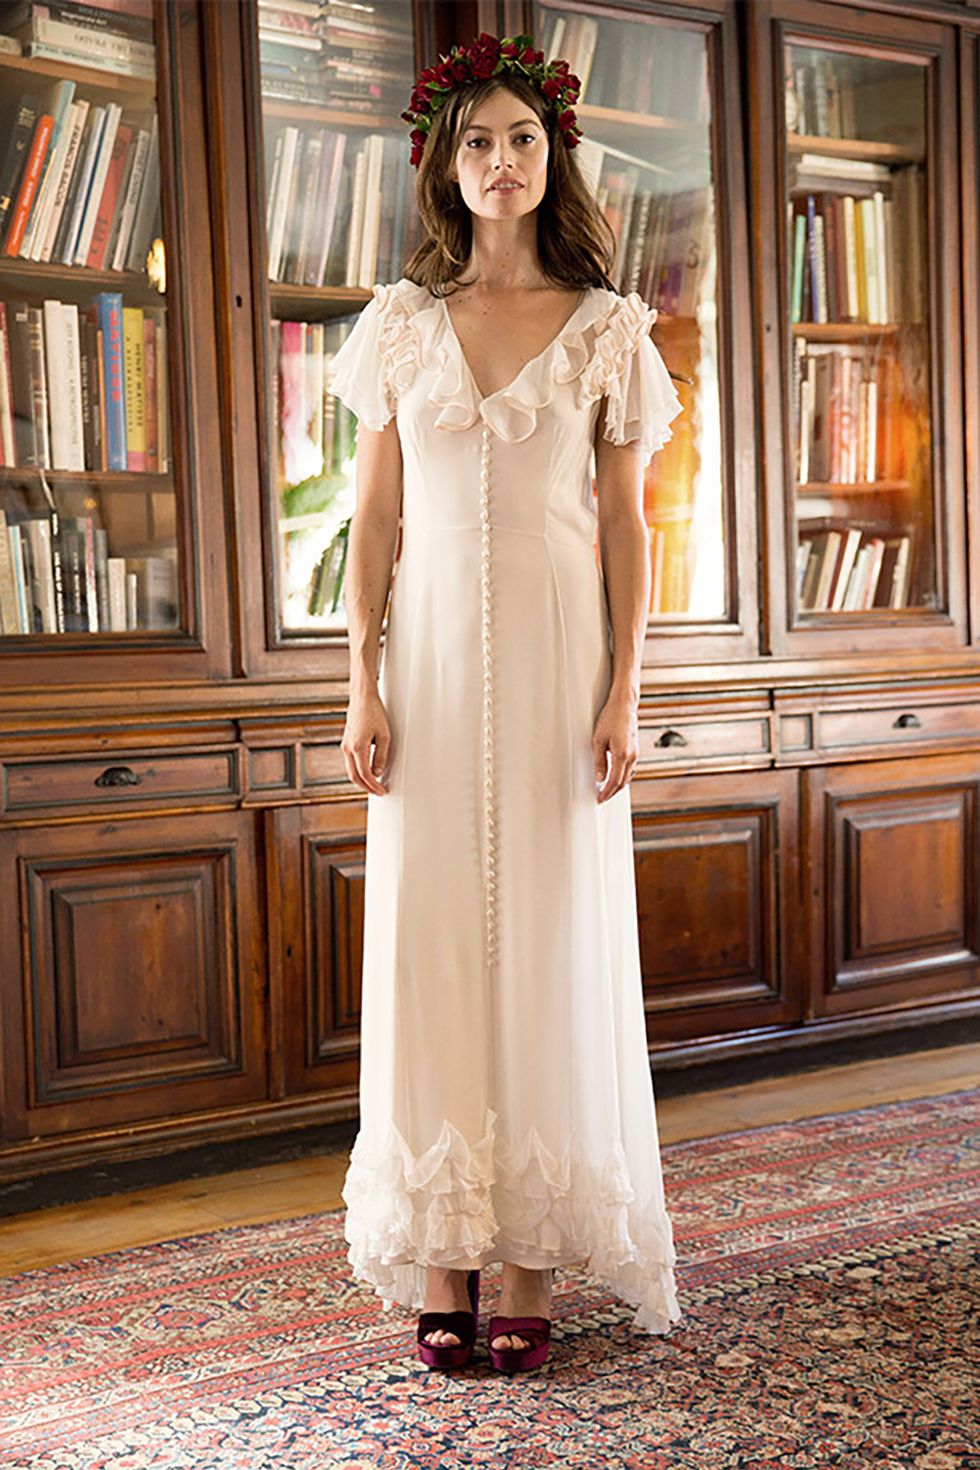 <p>If your aesthetic skews more boho, Stone Fox Bride&nbsp;= the first place you hit up after you call City Hall. Bonus: This ruffly guy could 100 percent be re-worn in the summer.&nbsp;</p><p>$4,600, <a href="https://stonefoxbride.com/products/sheer-silk-ruffle-wedding-dress" target="_blank" data-tracking-id="recirc-text-link">stonefoxbride.com</a>.</p>